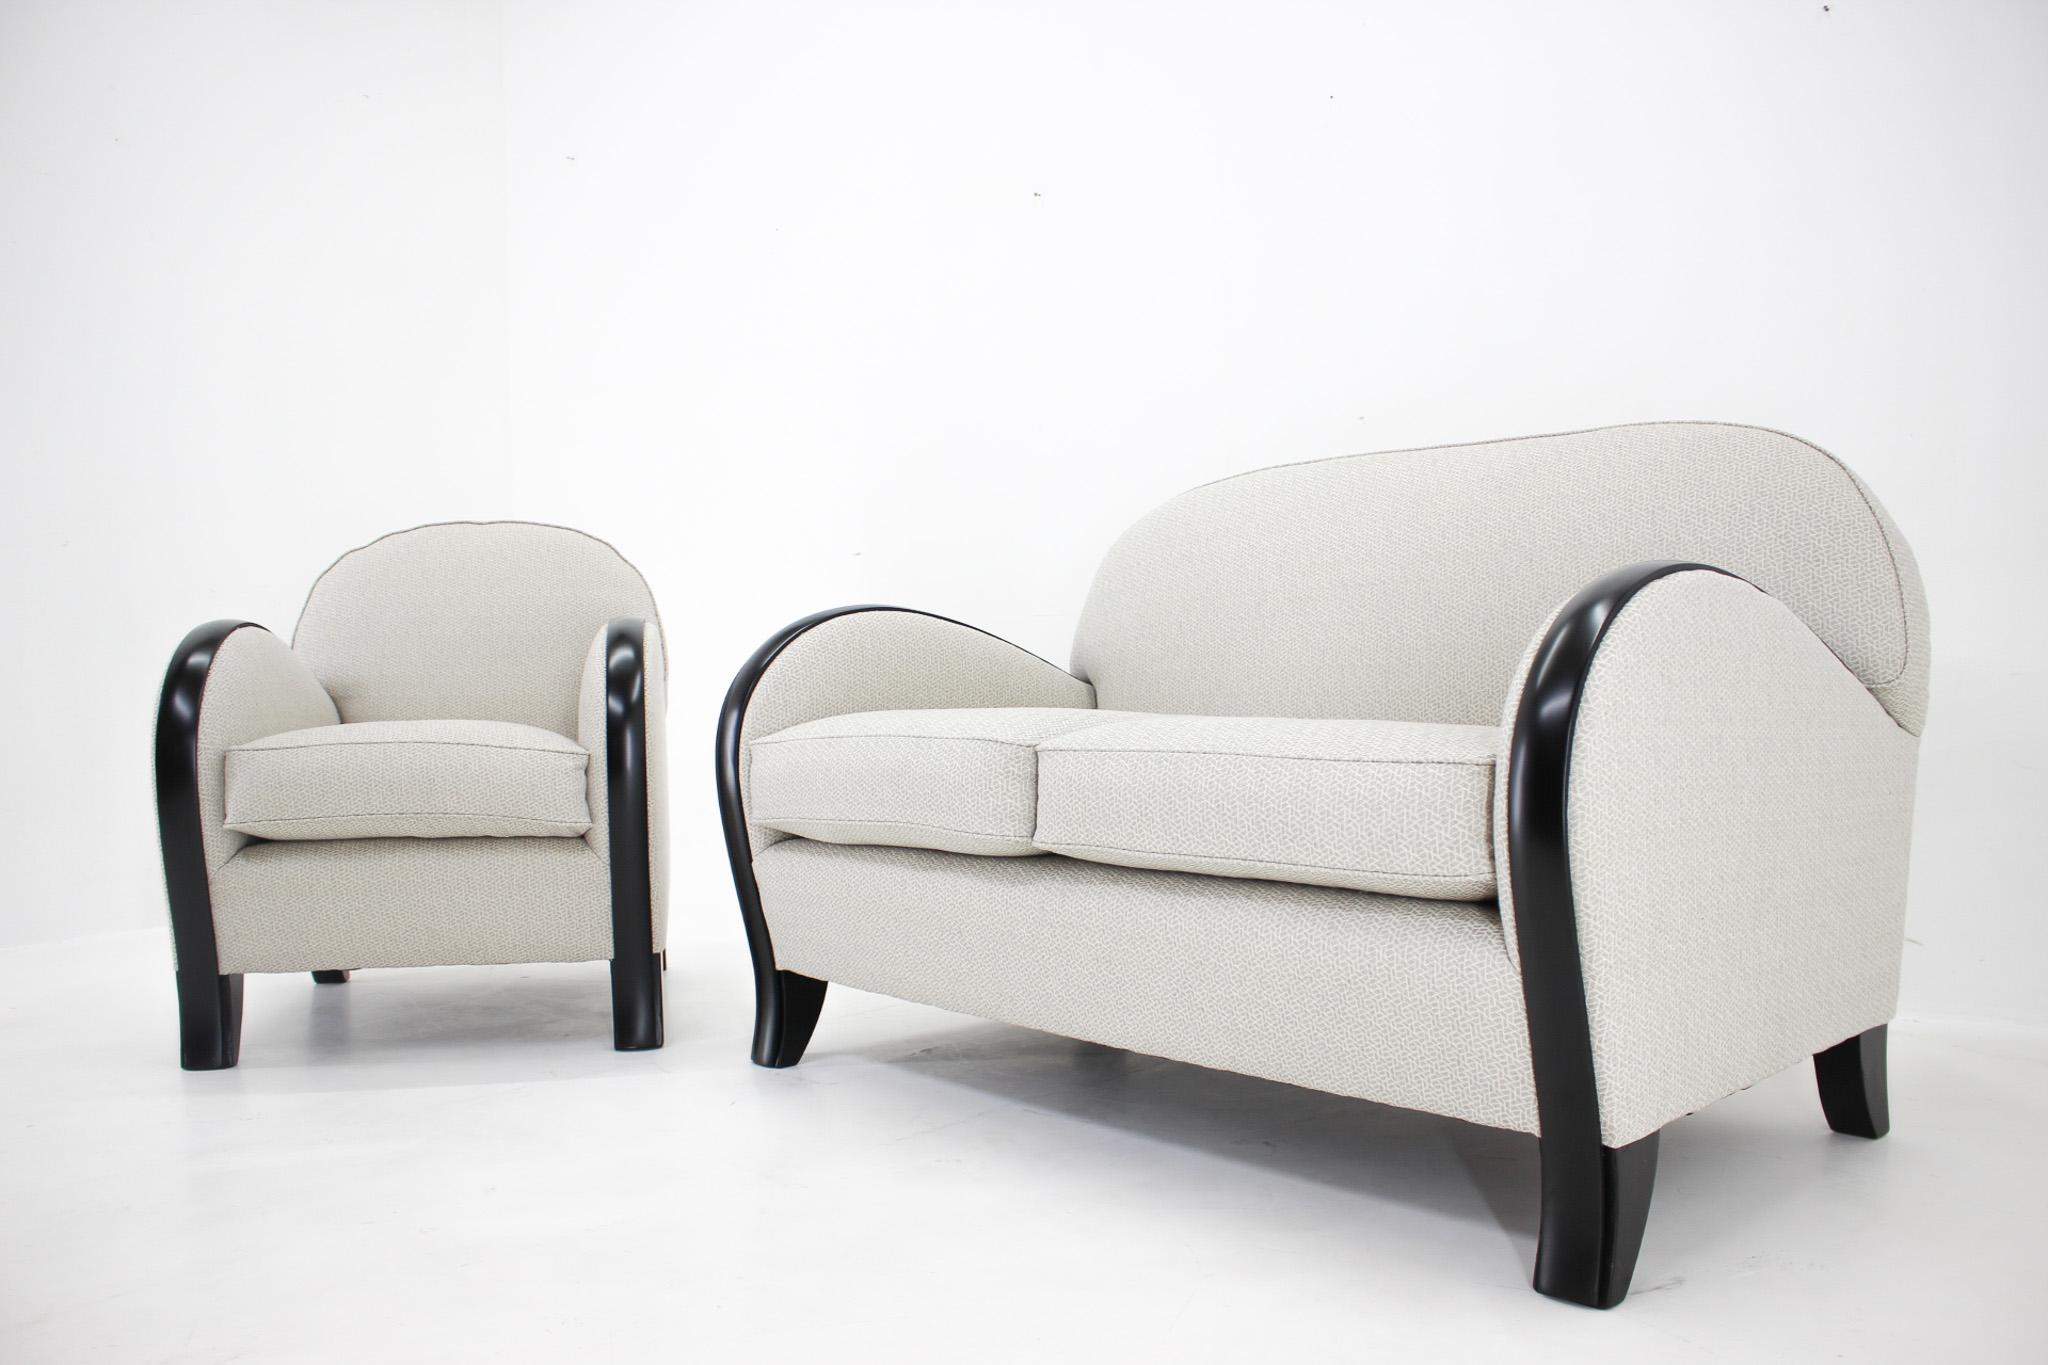 Italian Set of Newly Upholstered Two Seat Sofa & Armchair, Italy, 1940s